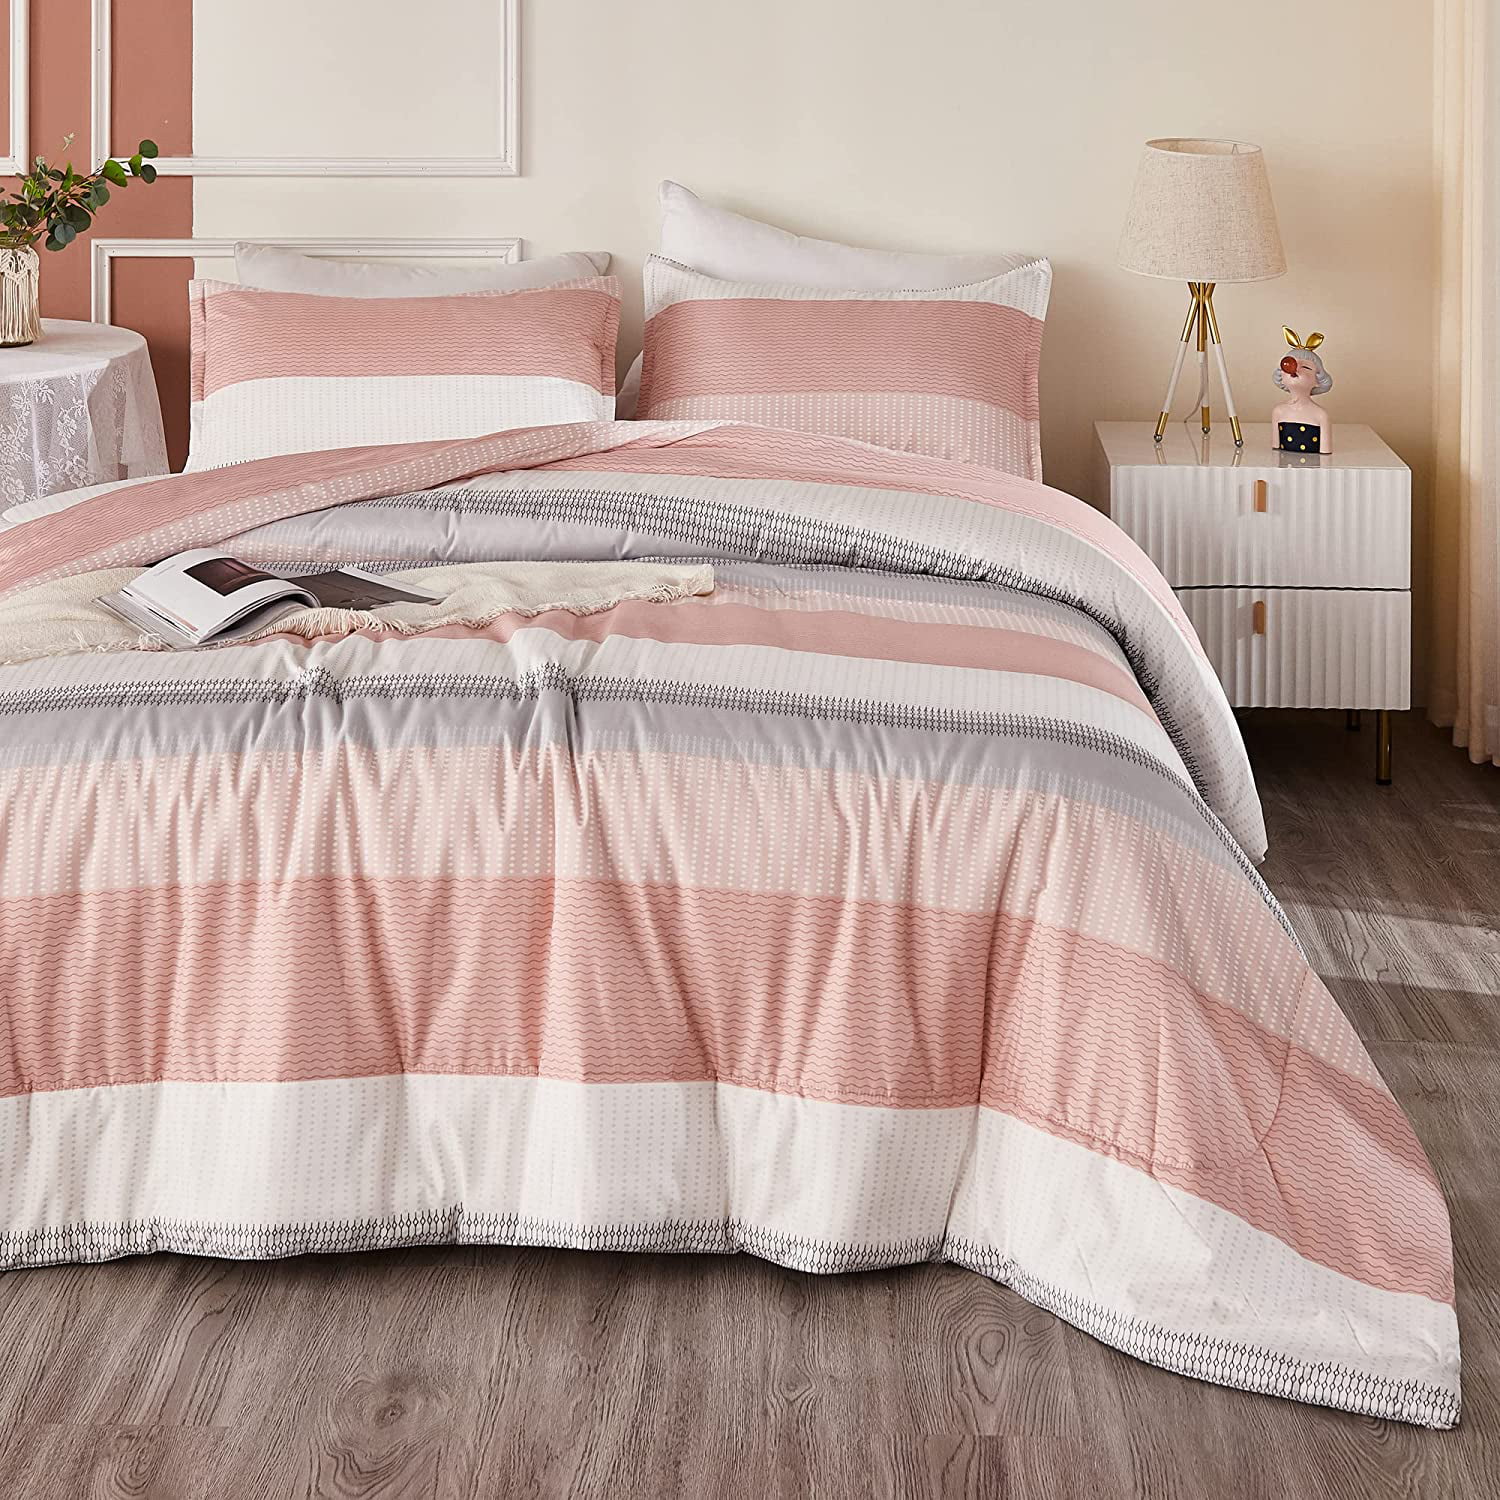 Bedbay Pink Queen Comforter Set Pink Bedding Ultra Soft Breathable 3 Pcs  Fluffy Comforter Bed Set for All Season White and Pink Reversible Aesthetic